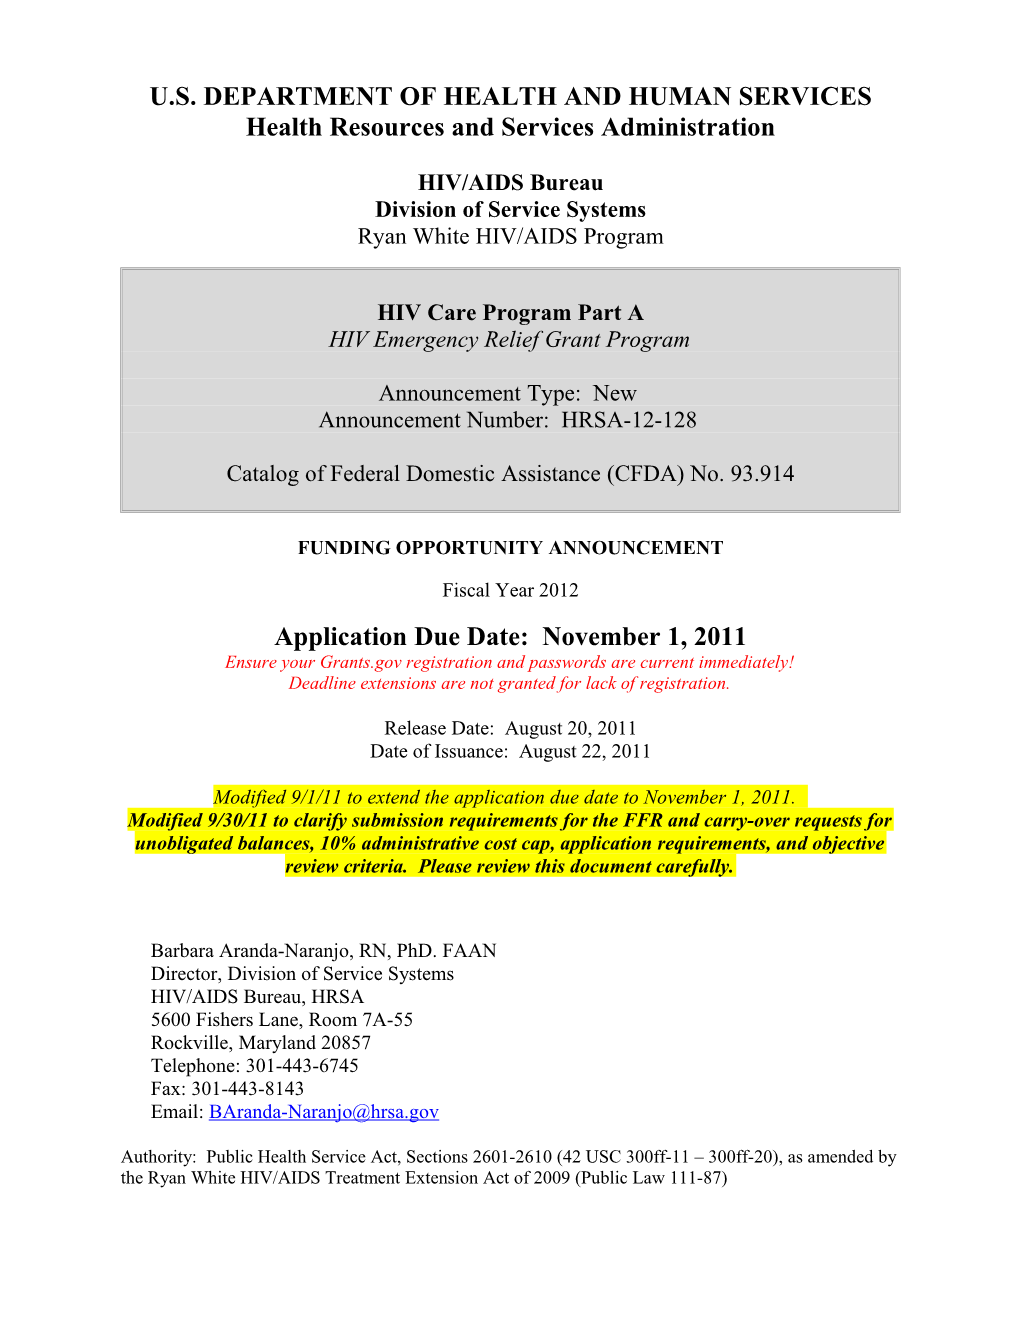 Funding Opportunity Announcement HRSA-12-128